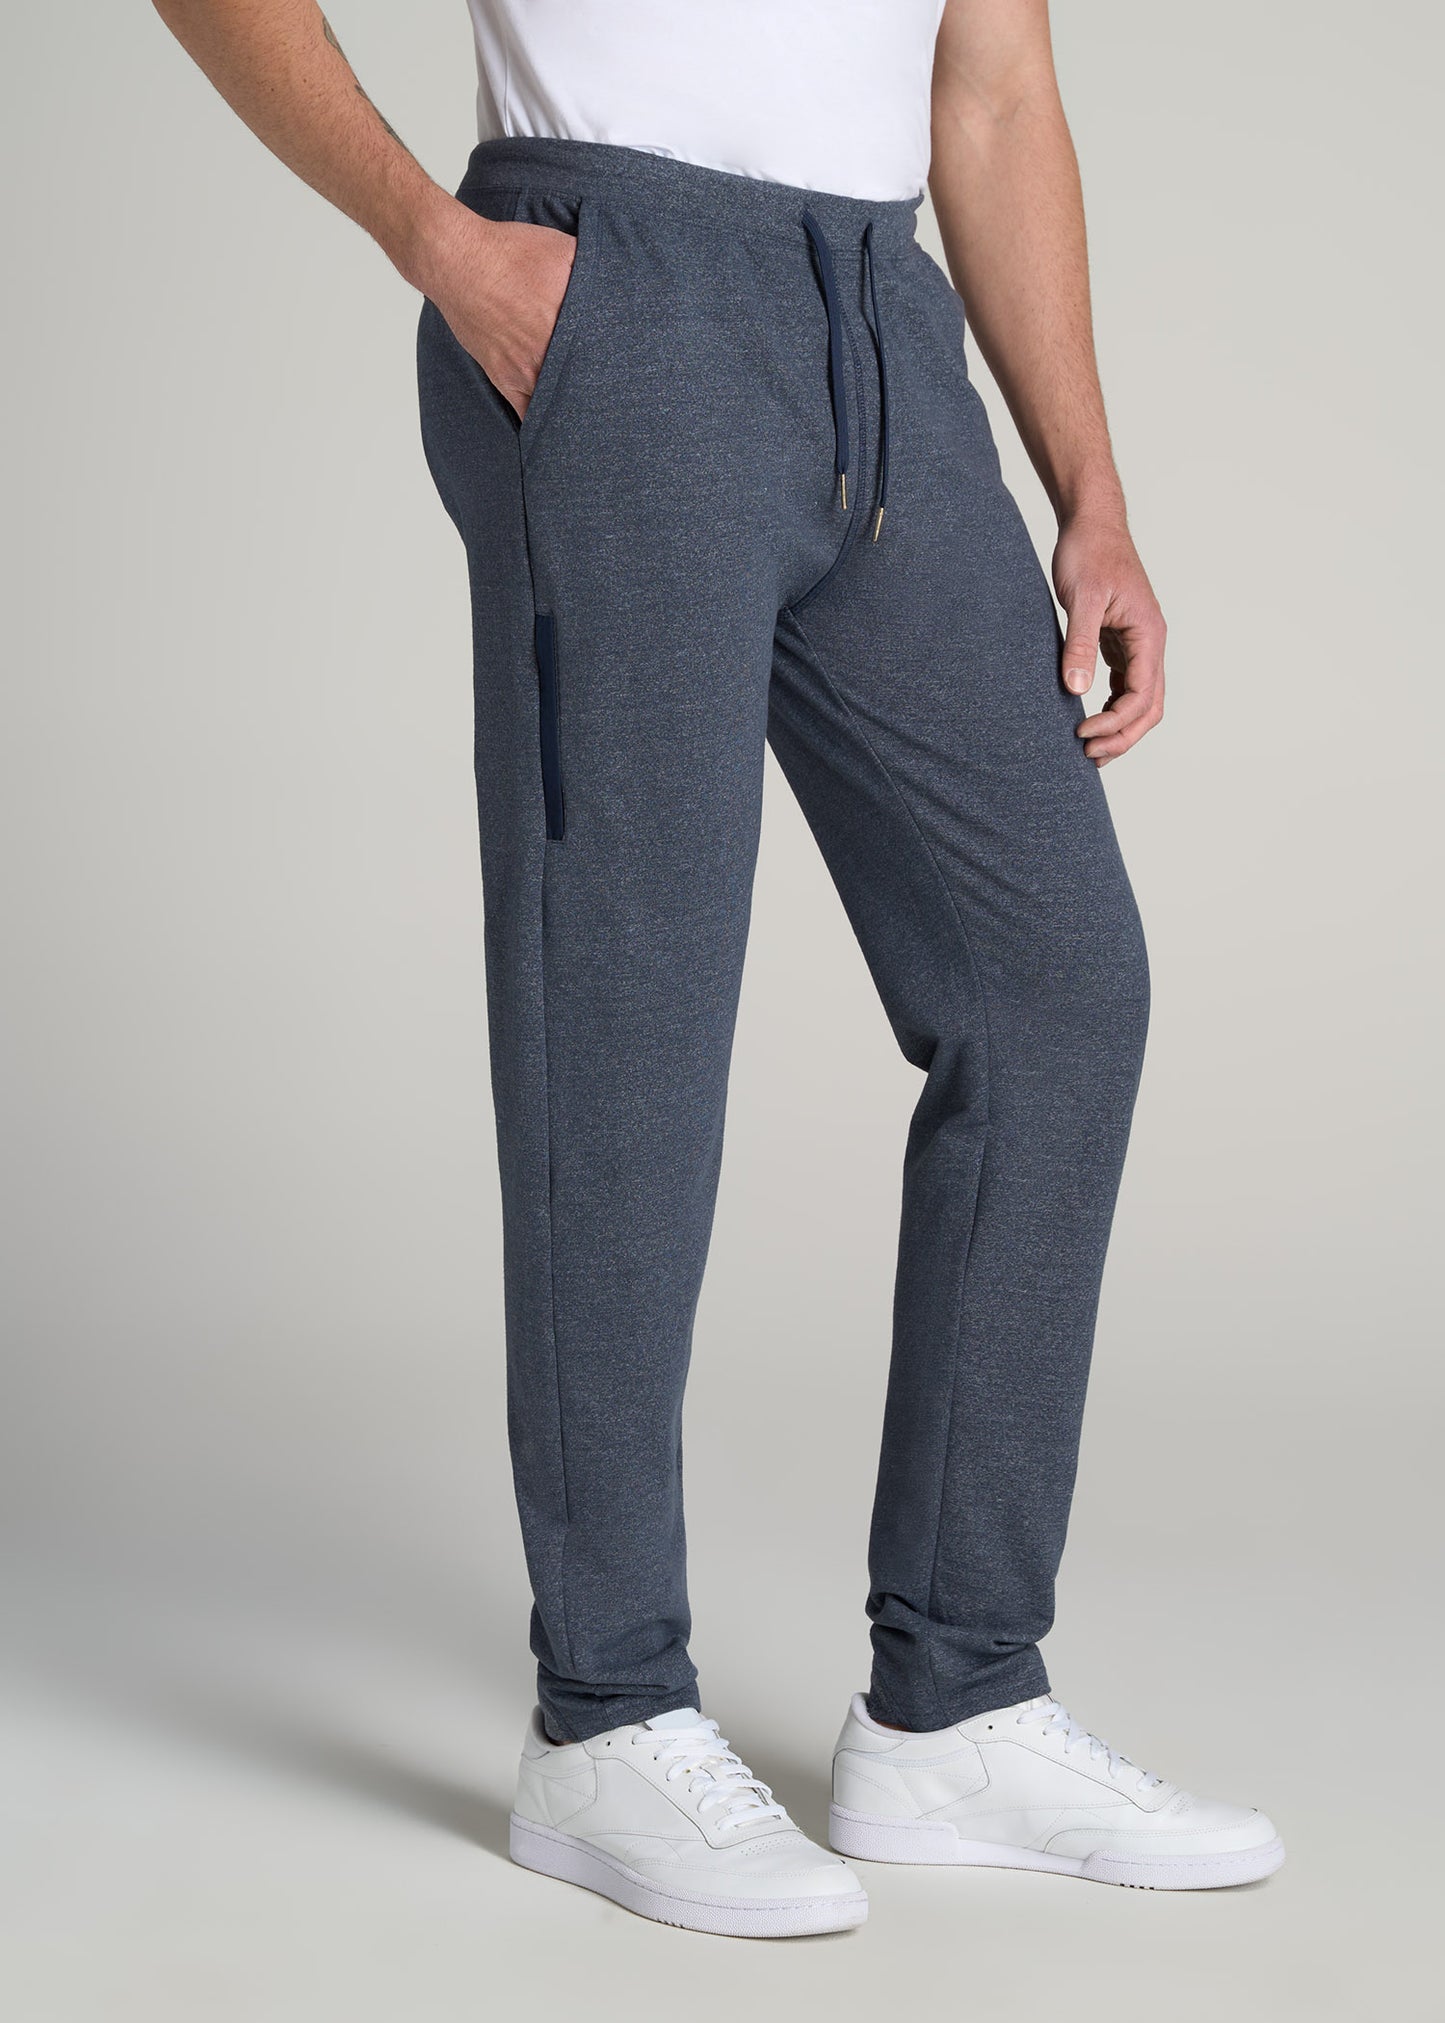 Microsanded French Terry Sweatpants for Tall Men